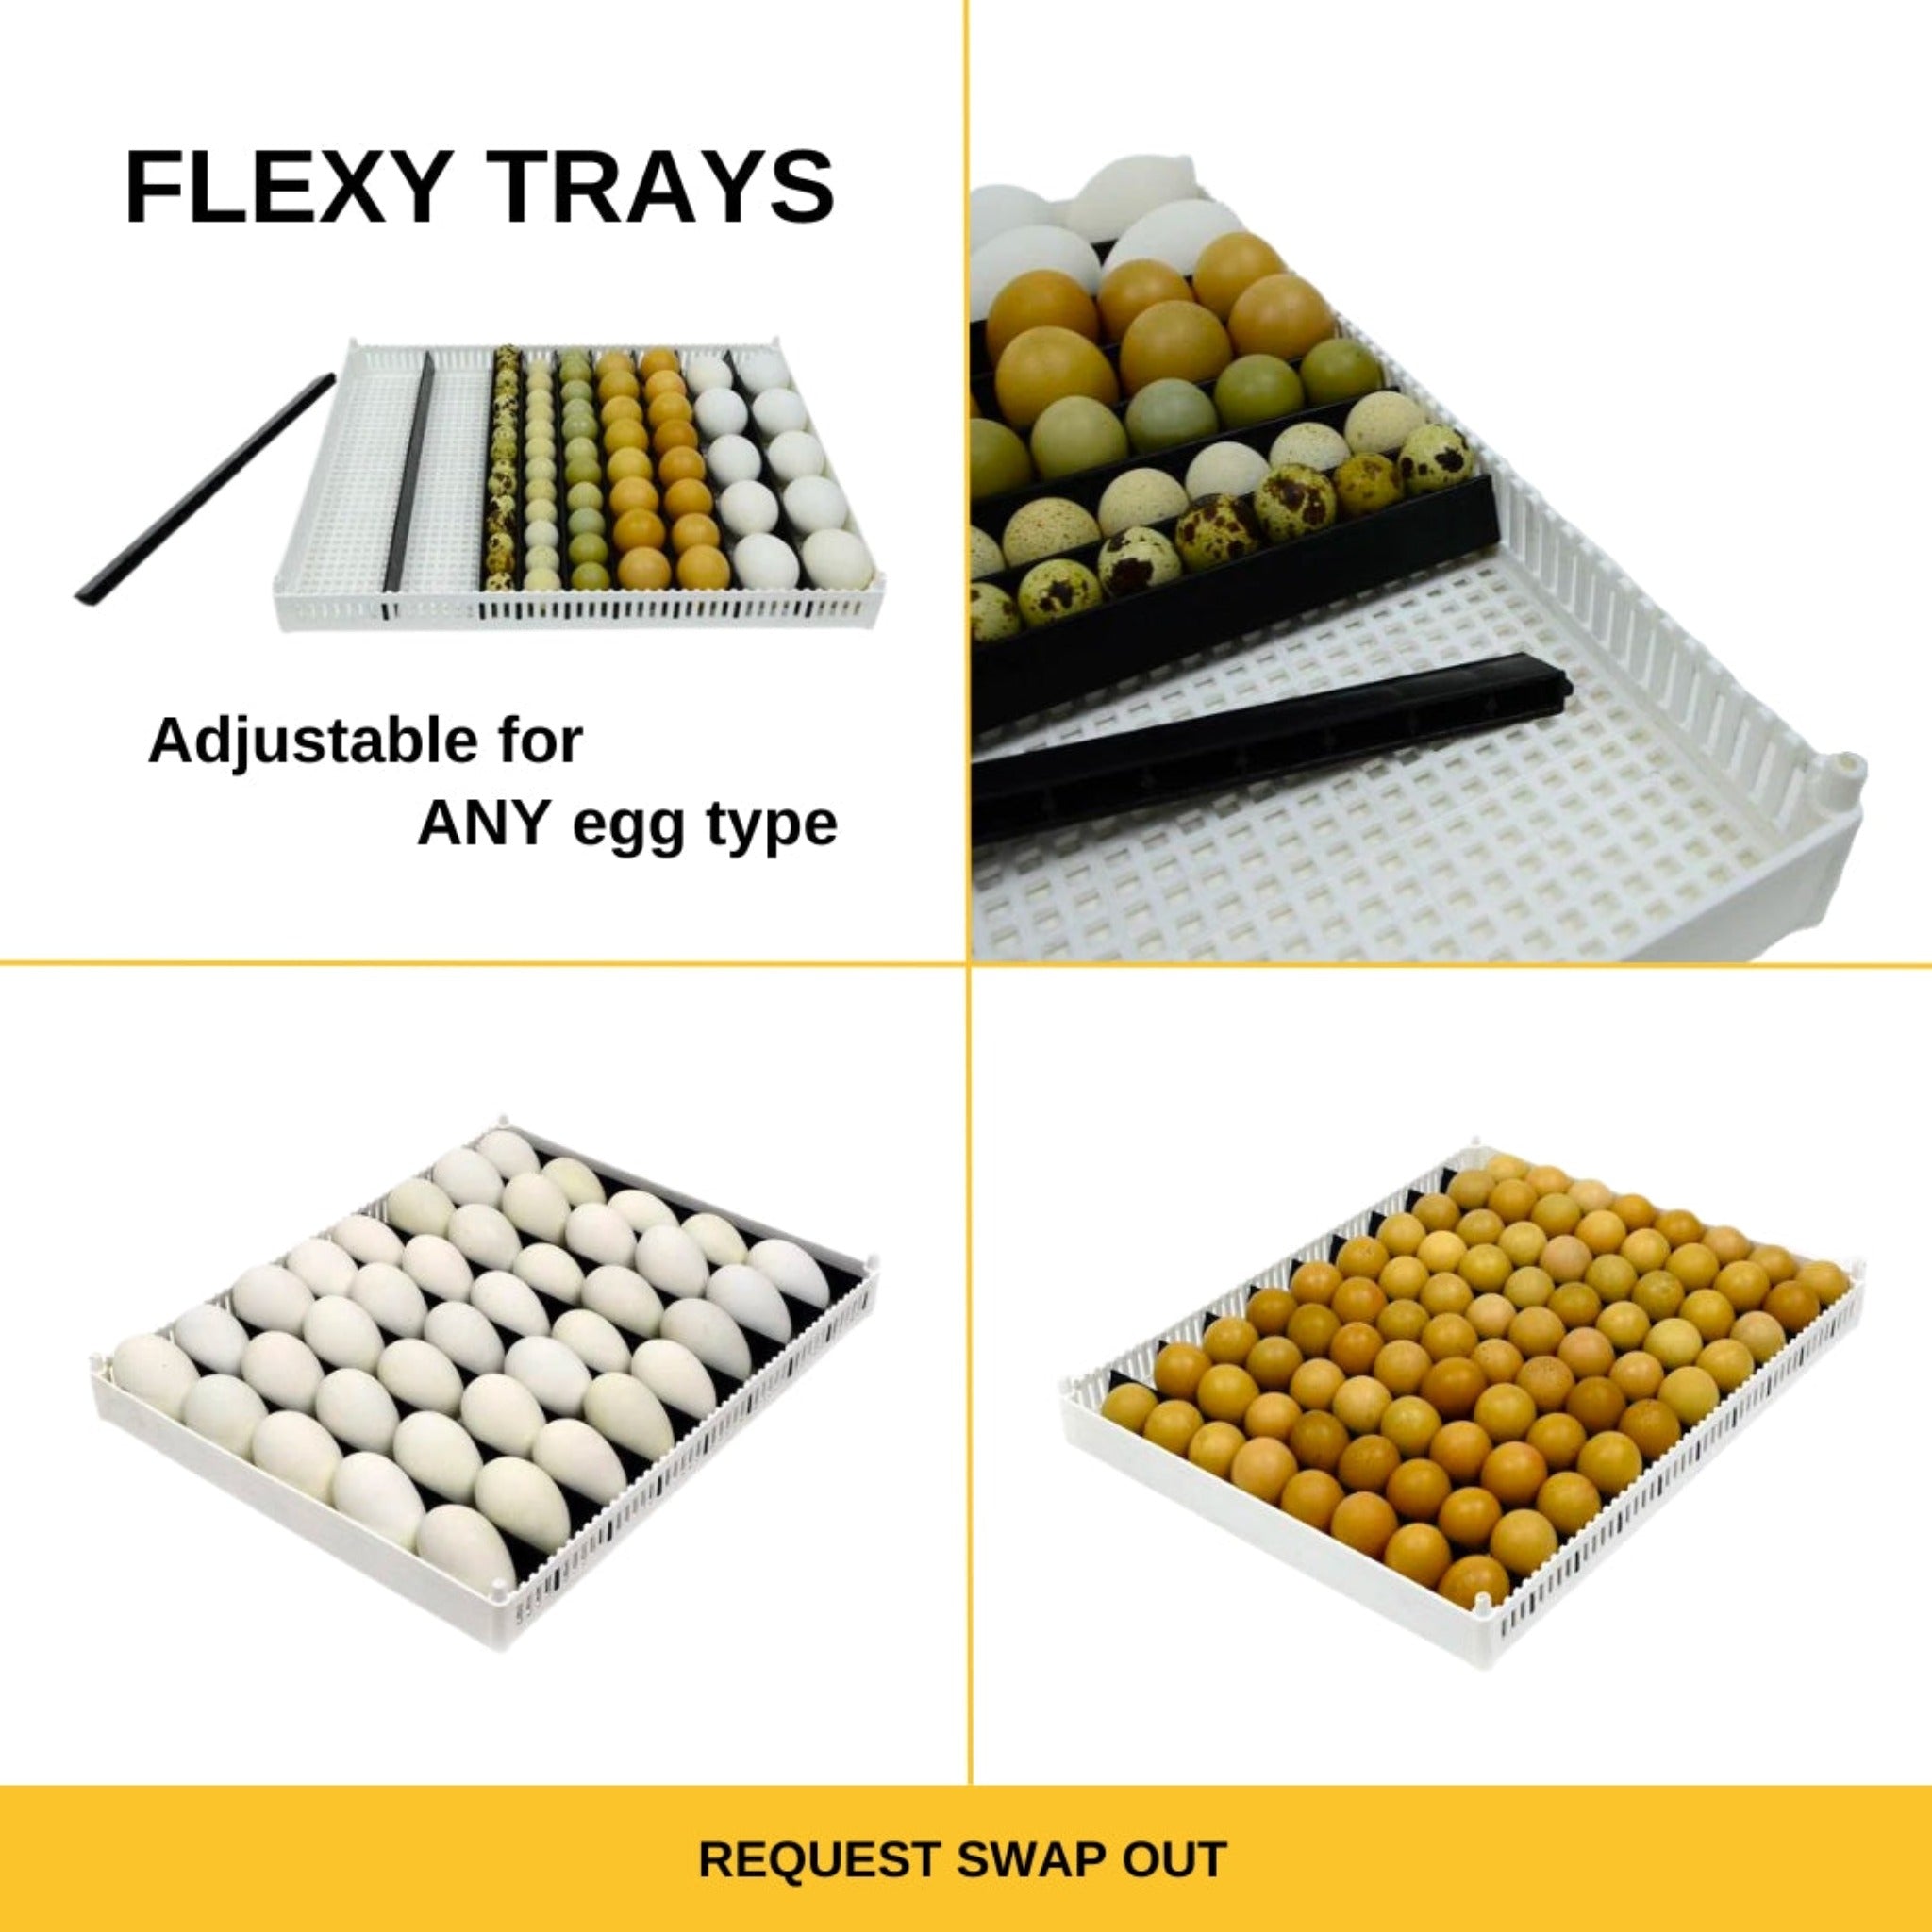 Flexy tray design can be seen in a 4 panel infographic. Image shows that flexy trays are adjustable for any egg type, chicken, quail, turkey, duck goose eggs all shown.